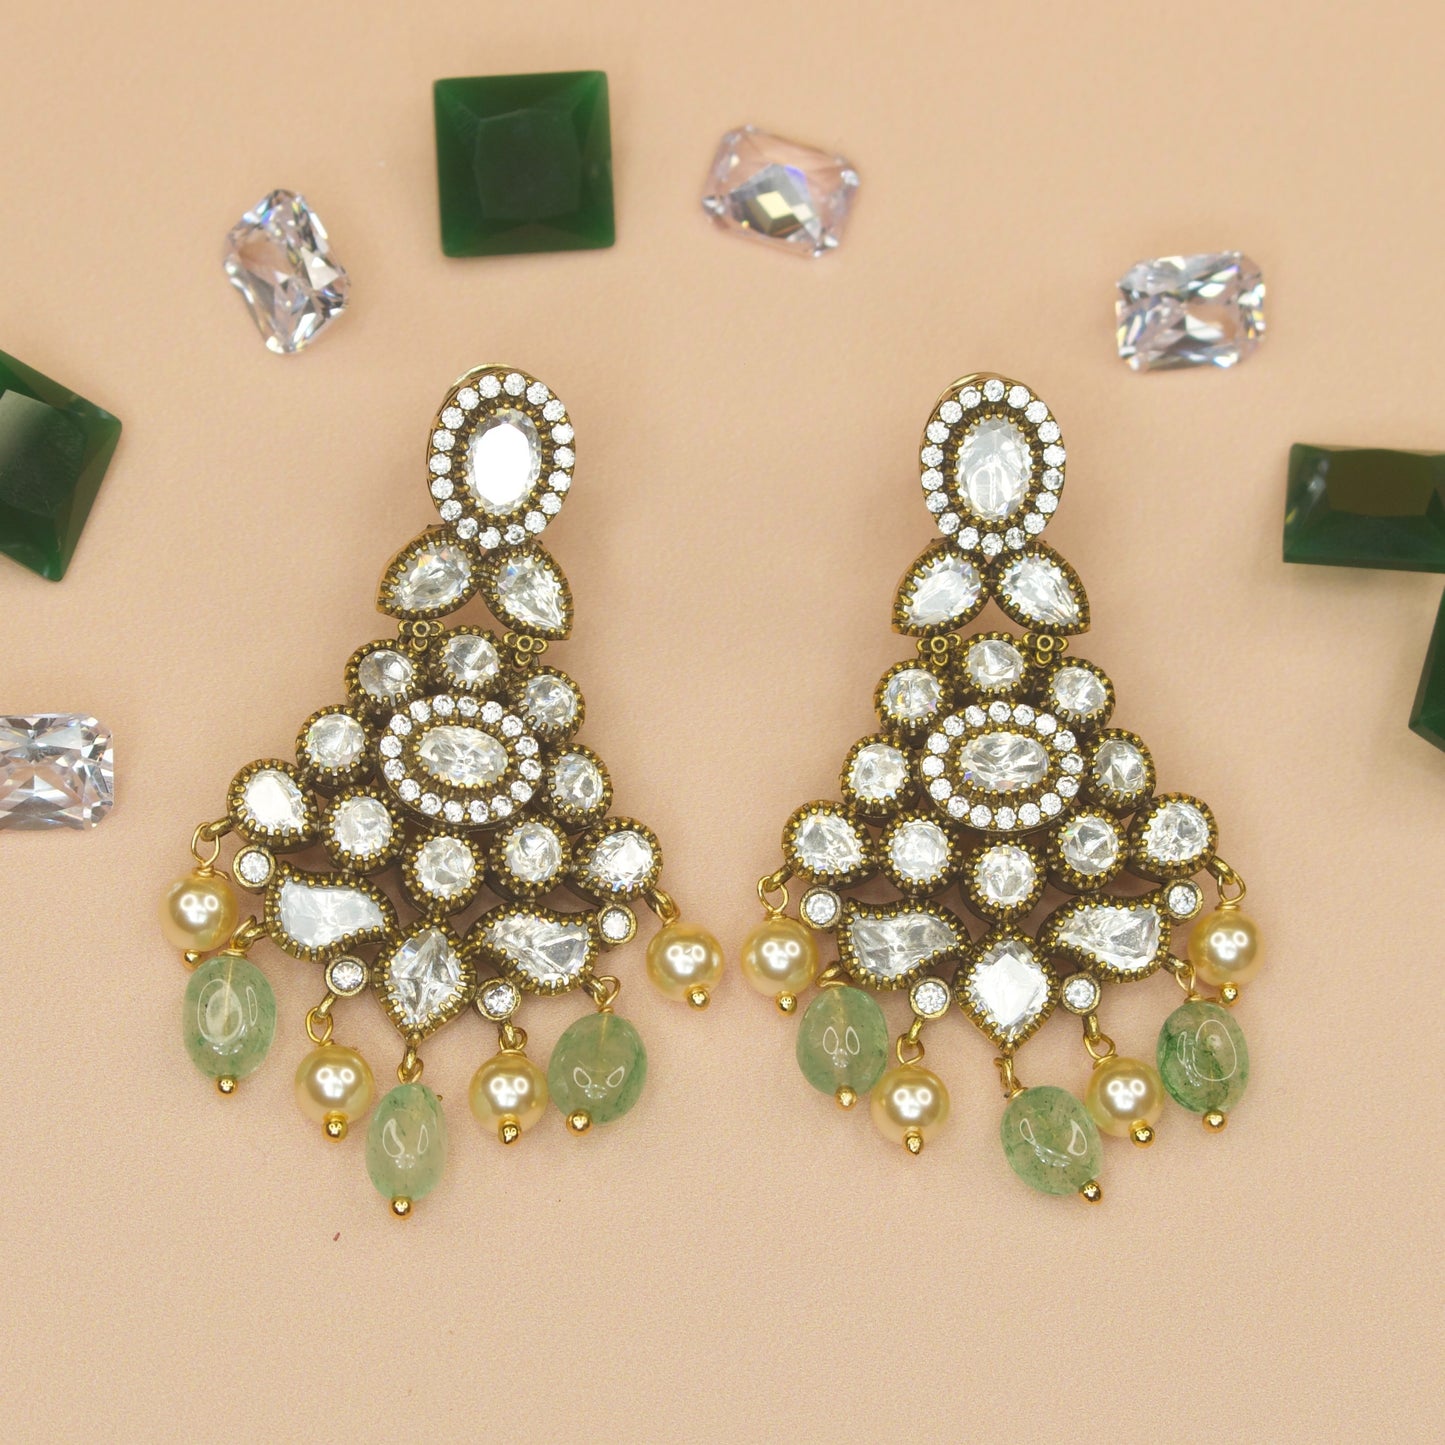 Polki Victorian Earrings with Pearls